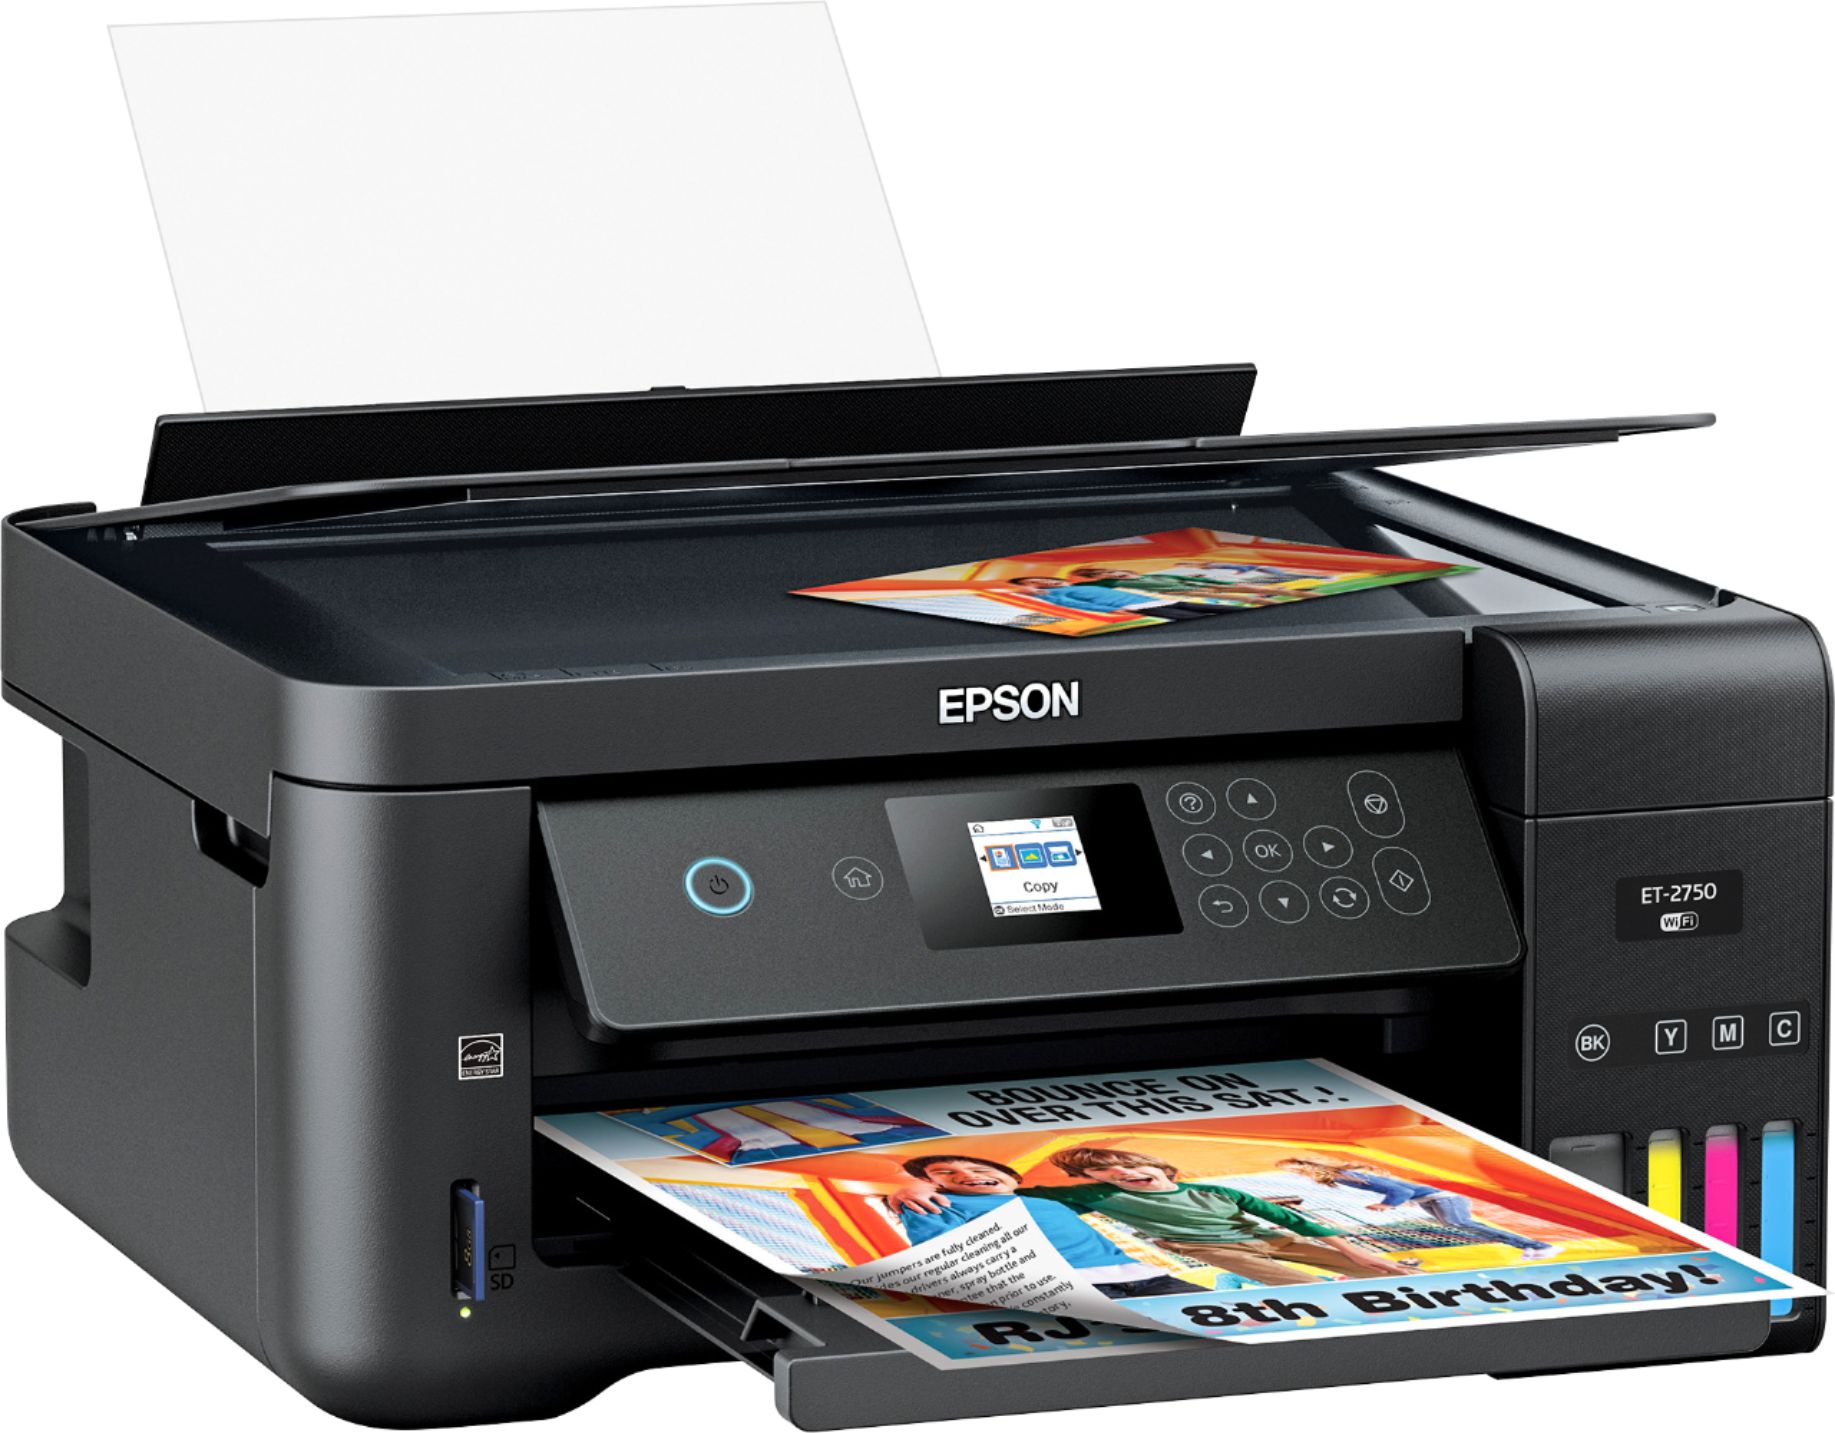 Angle View: Epson - Expression EcoTank ET-2750 Wireless All-in-One Inkjet Printer - Black